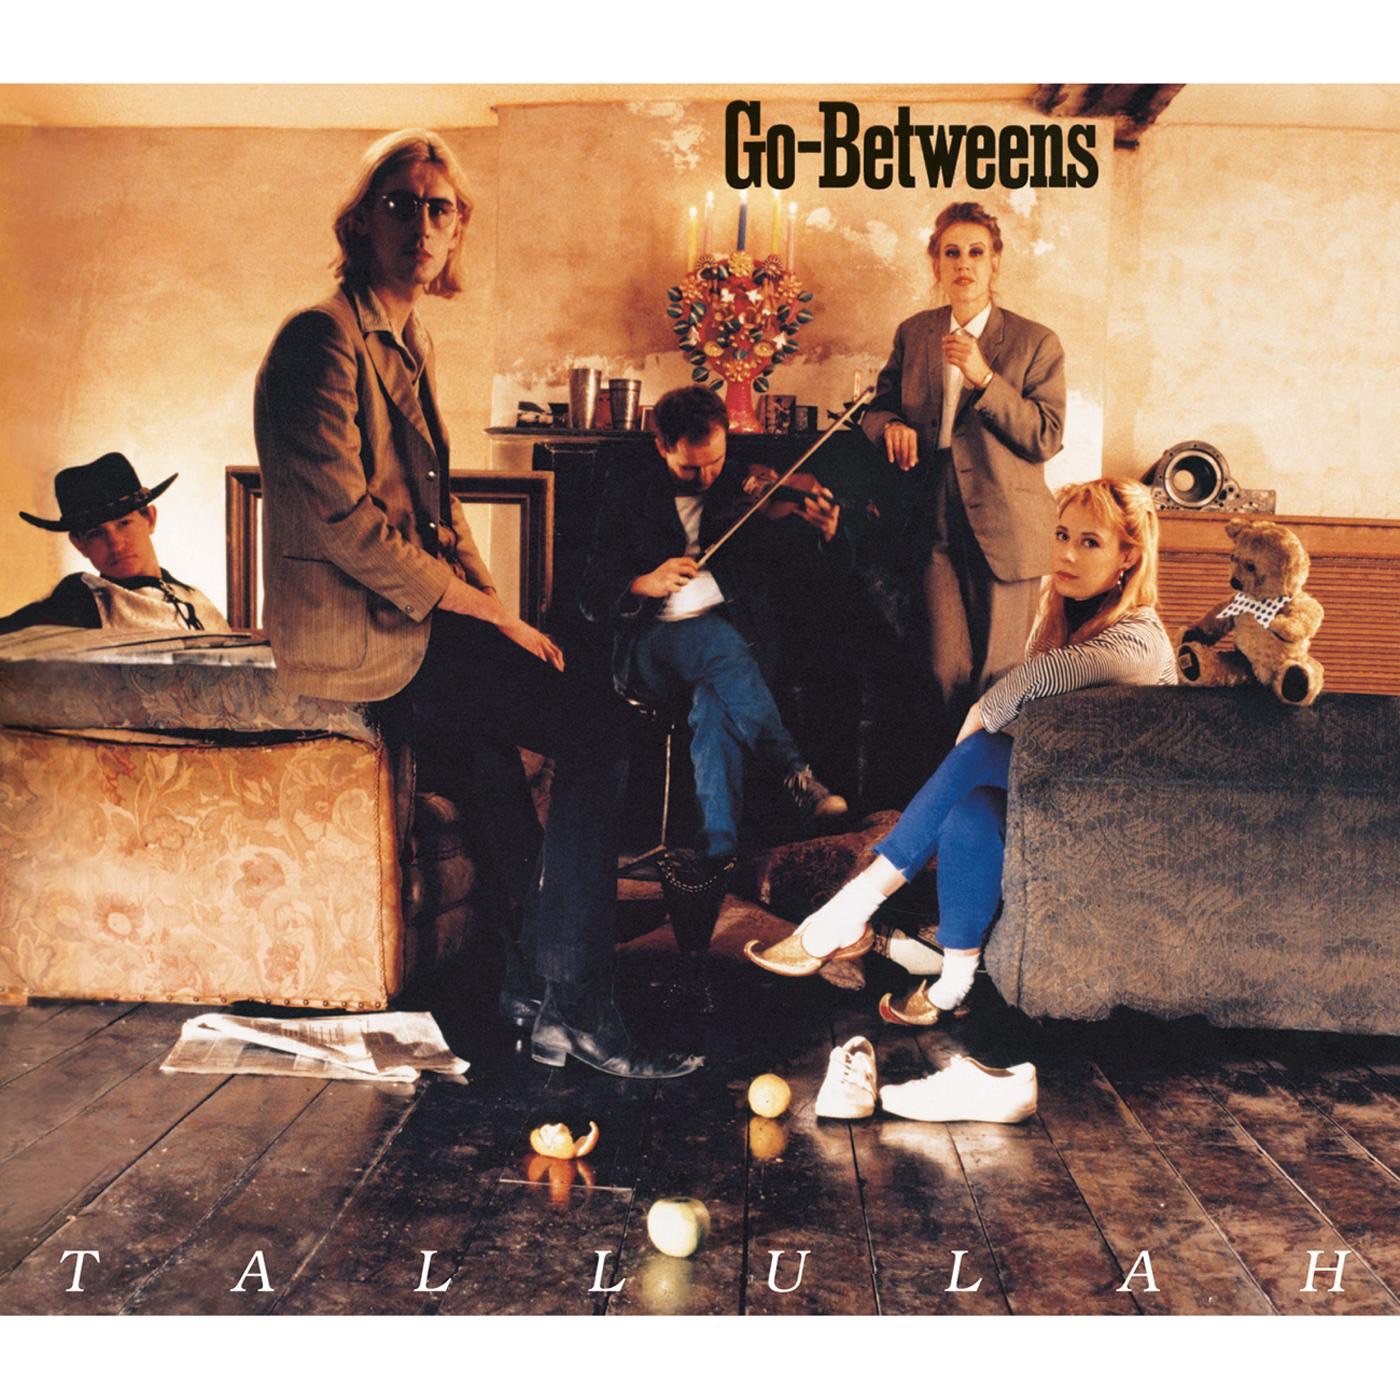 Tallulah by The Go-Betweens